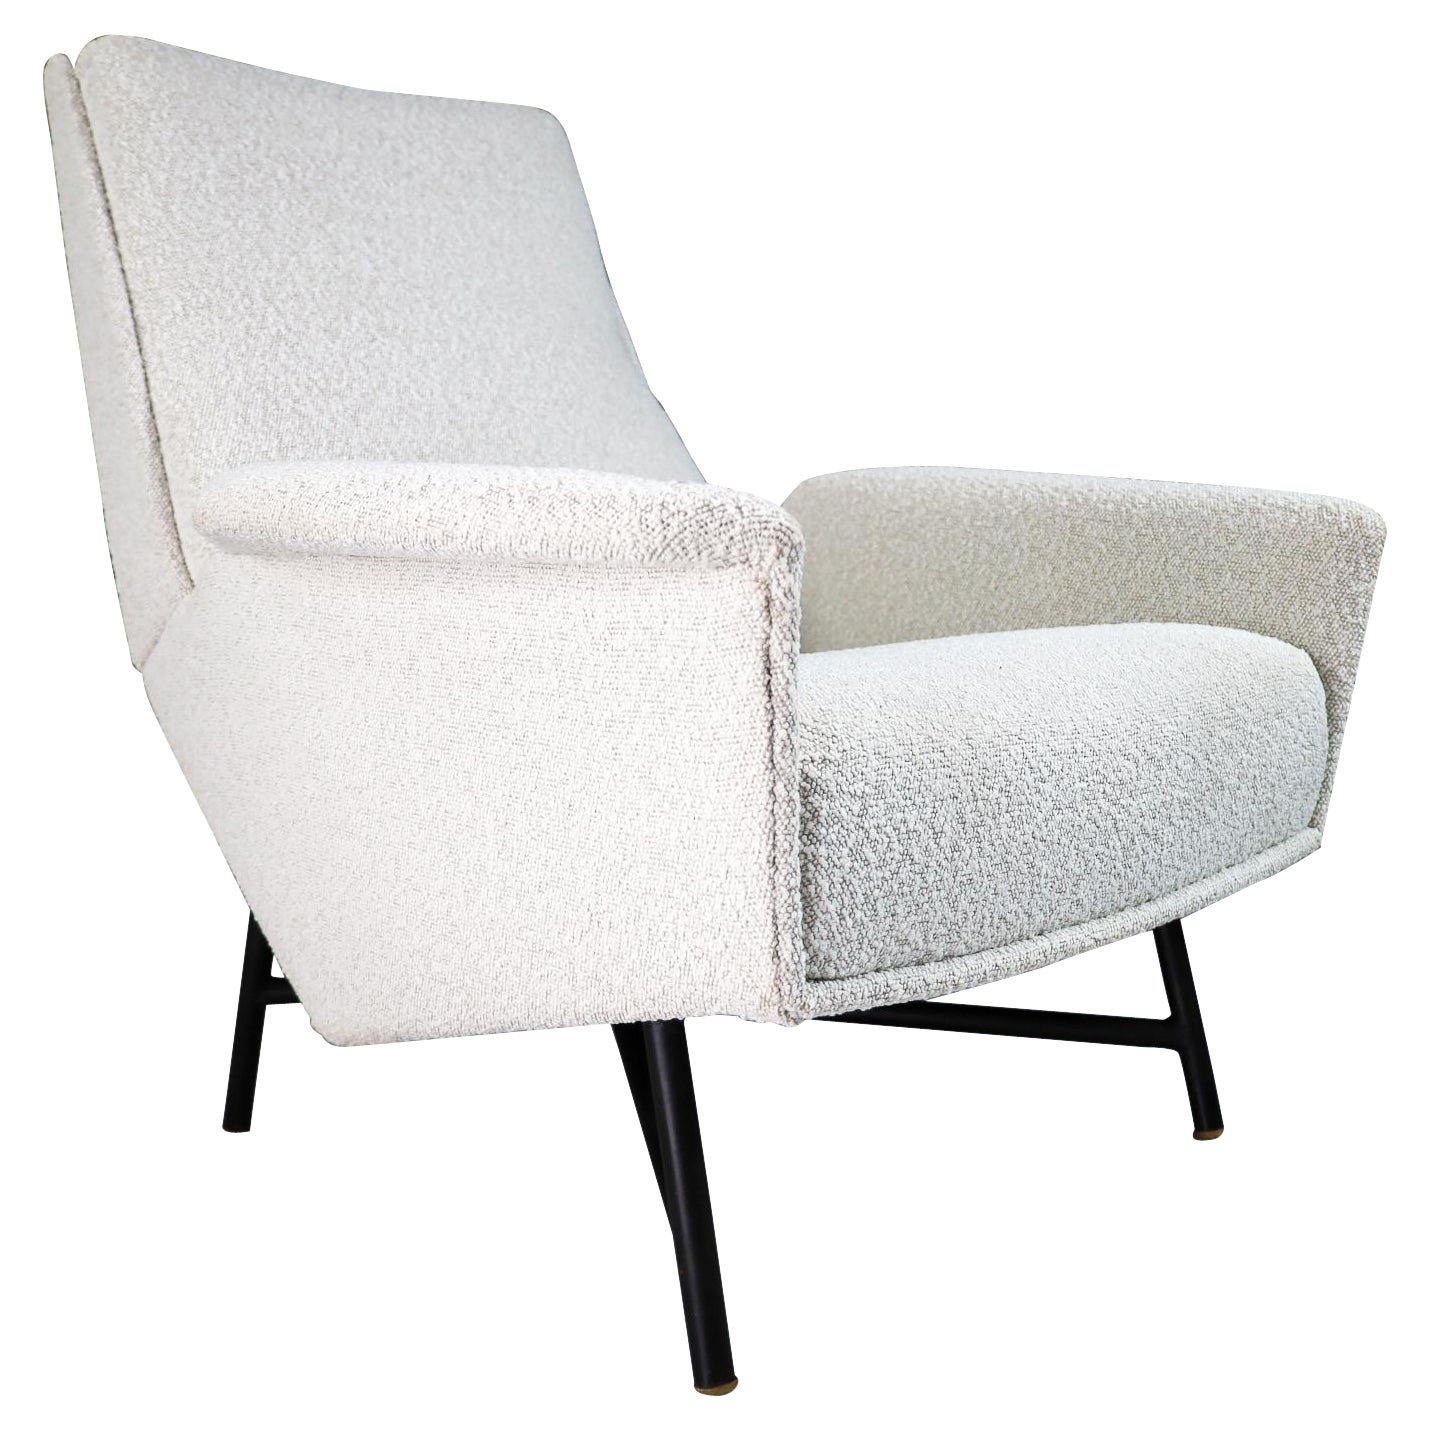 Midcentury Modern Lounge Chair in Re Upholstered Boucle Wool by Guy Besnard 1959